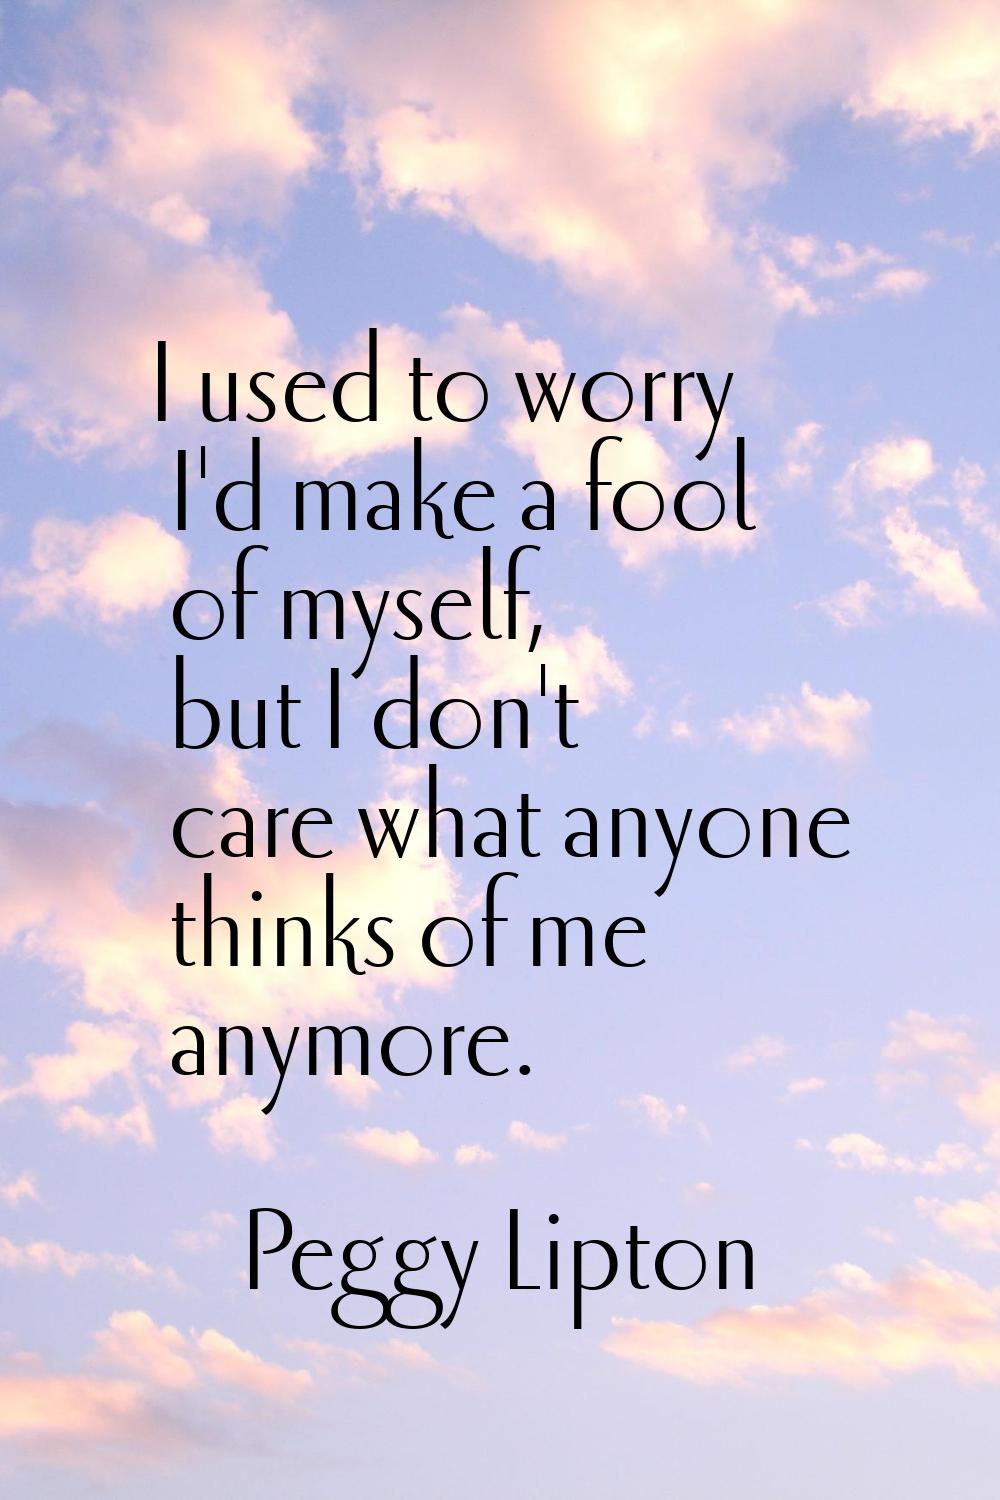 I used to worry I'd make a fool of myself, but I don't care what anyone thinks of me anymore.